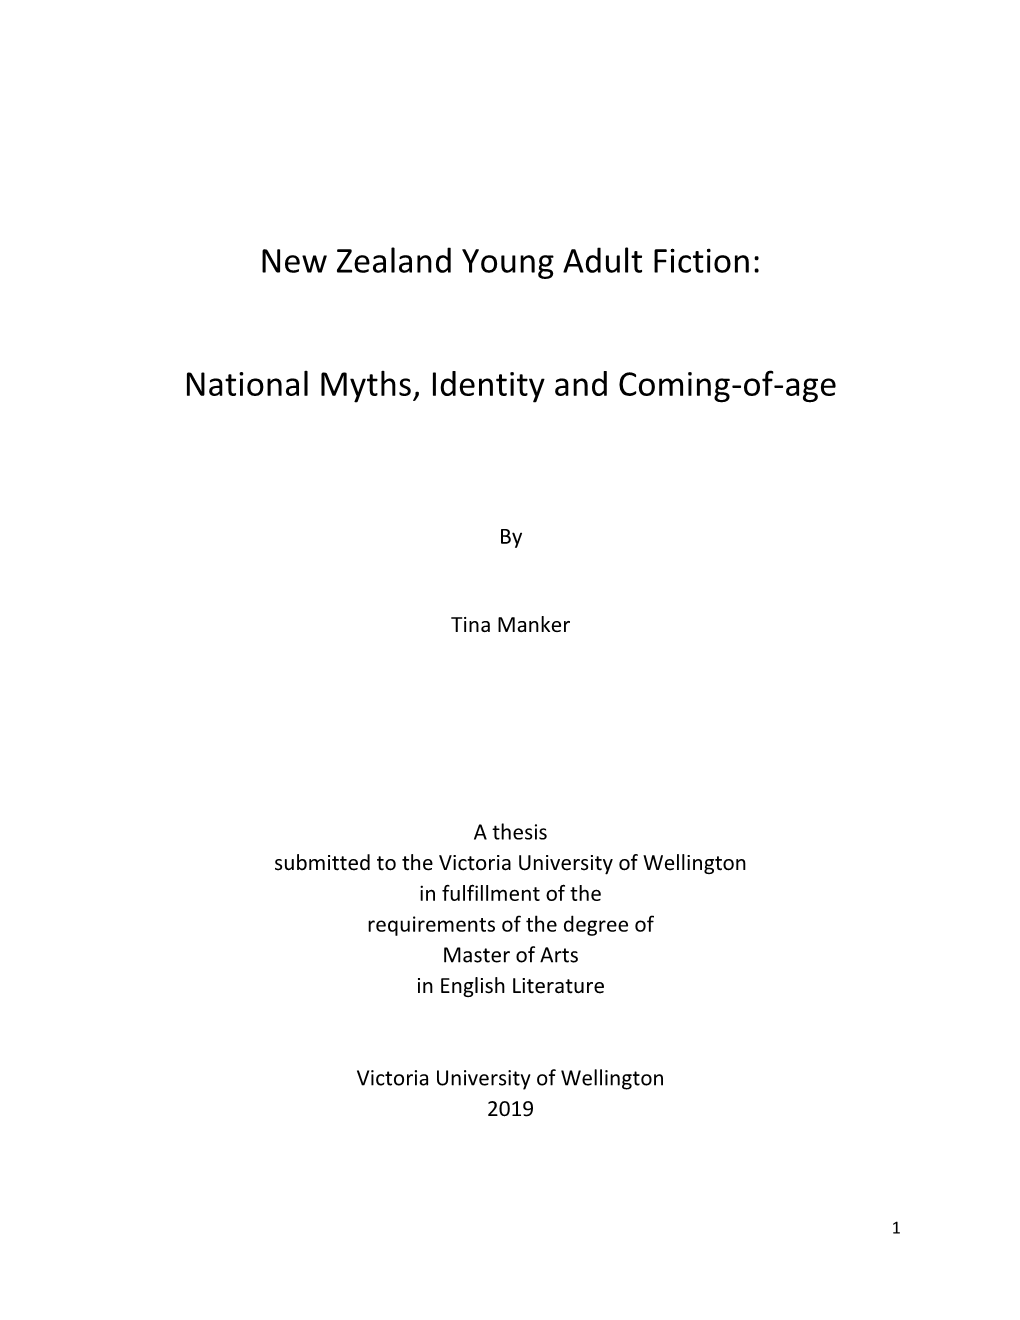 New Zealand Young Adult Fiction: National Myths, Identity And